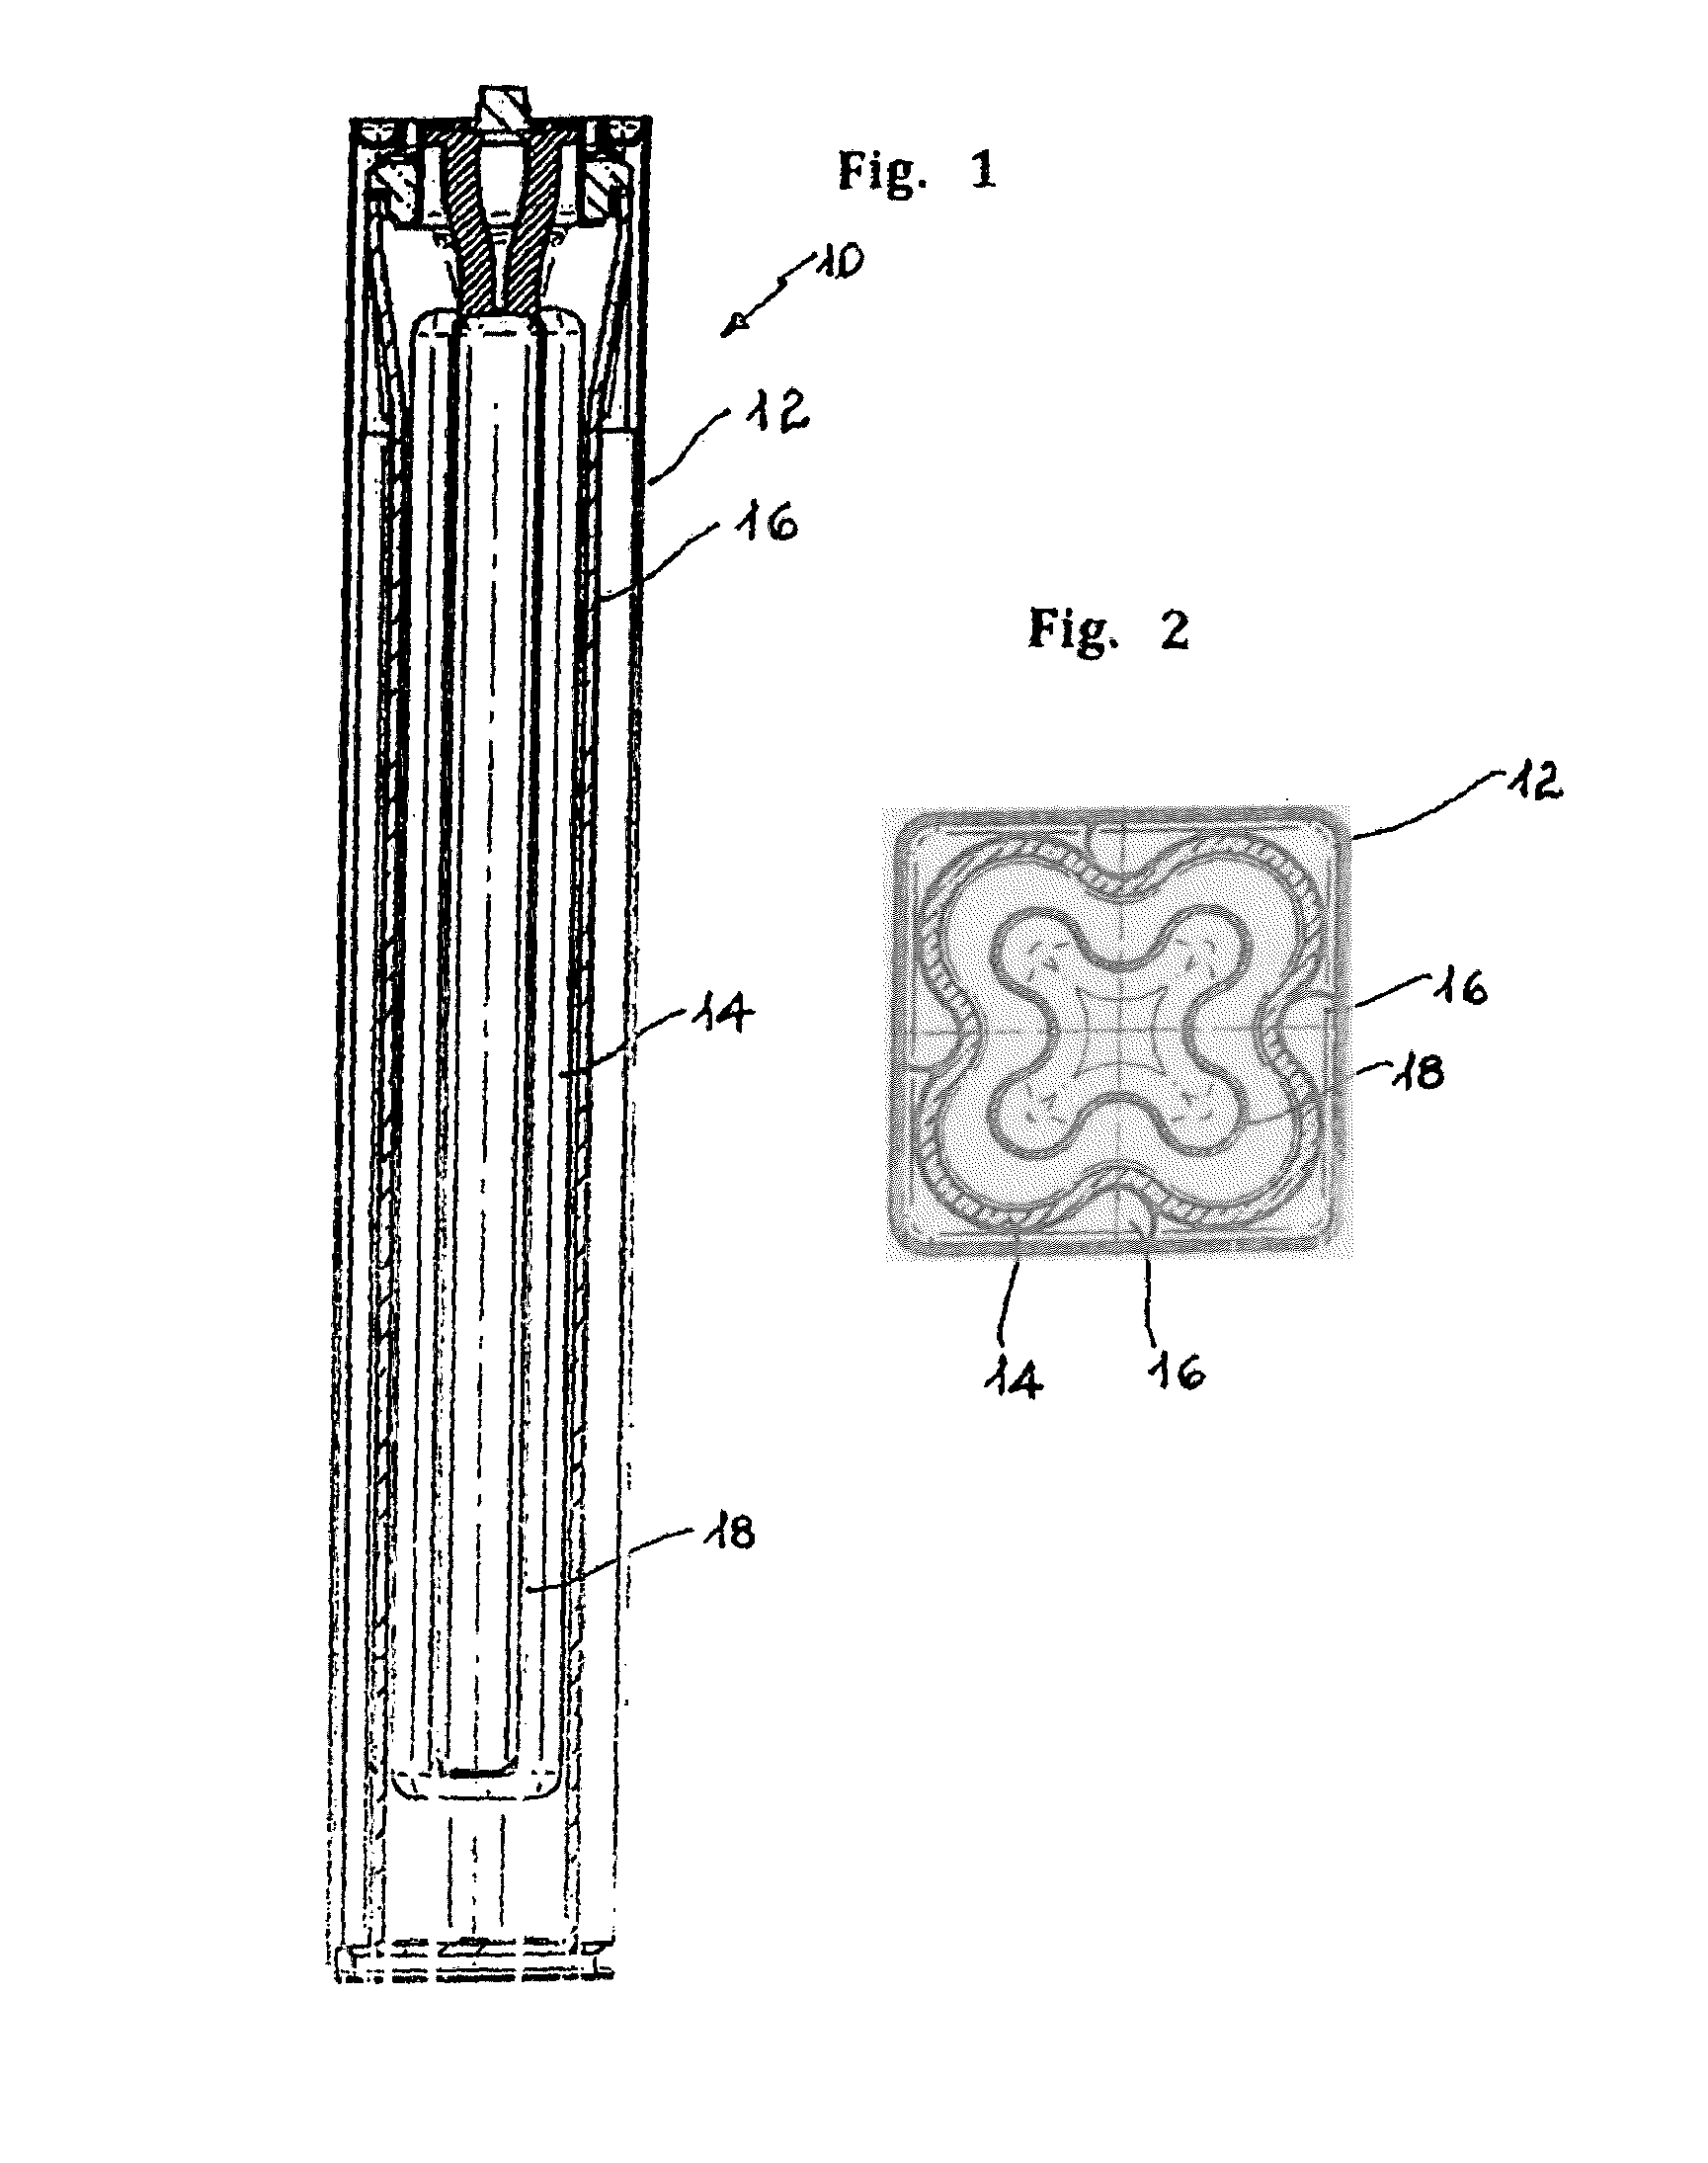 High-efficiency, high-temperature, sodium-based electrochemical cell